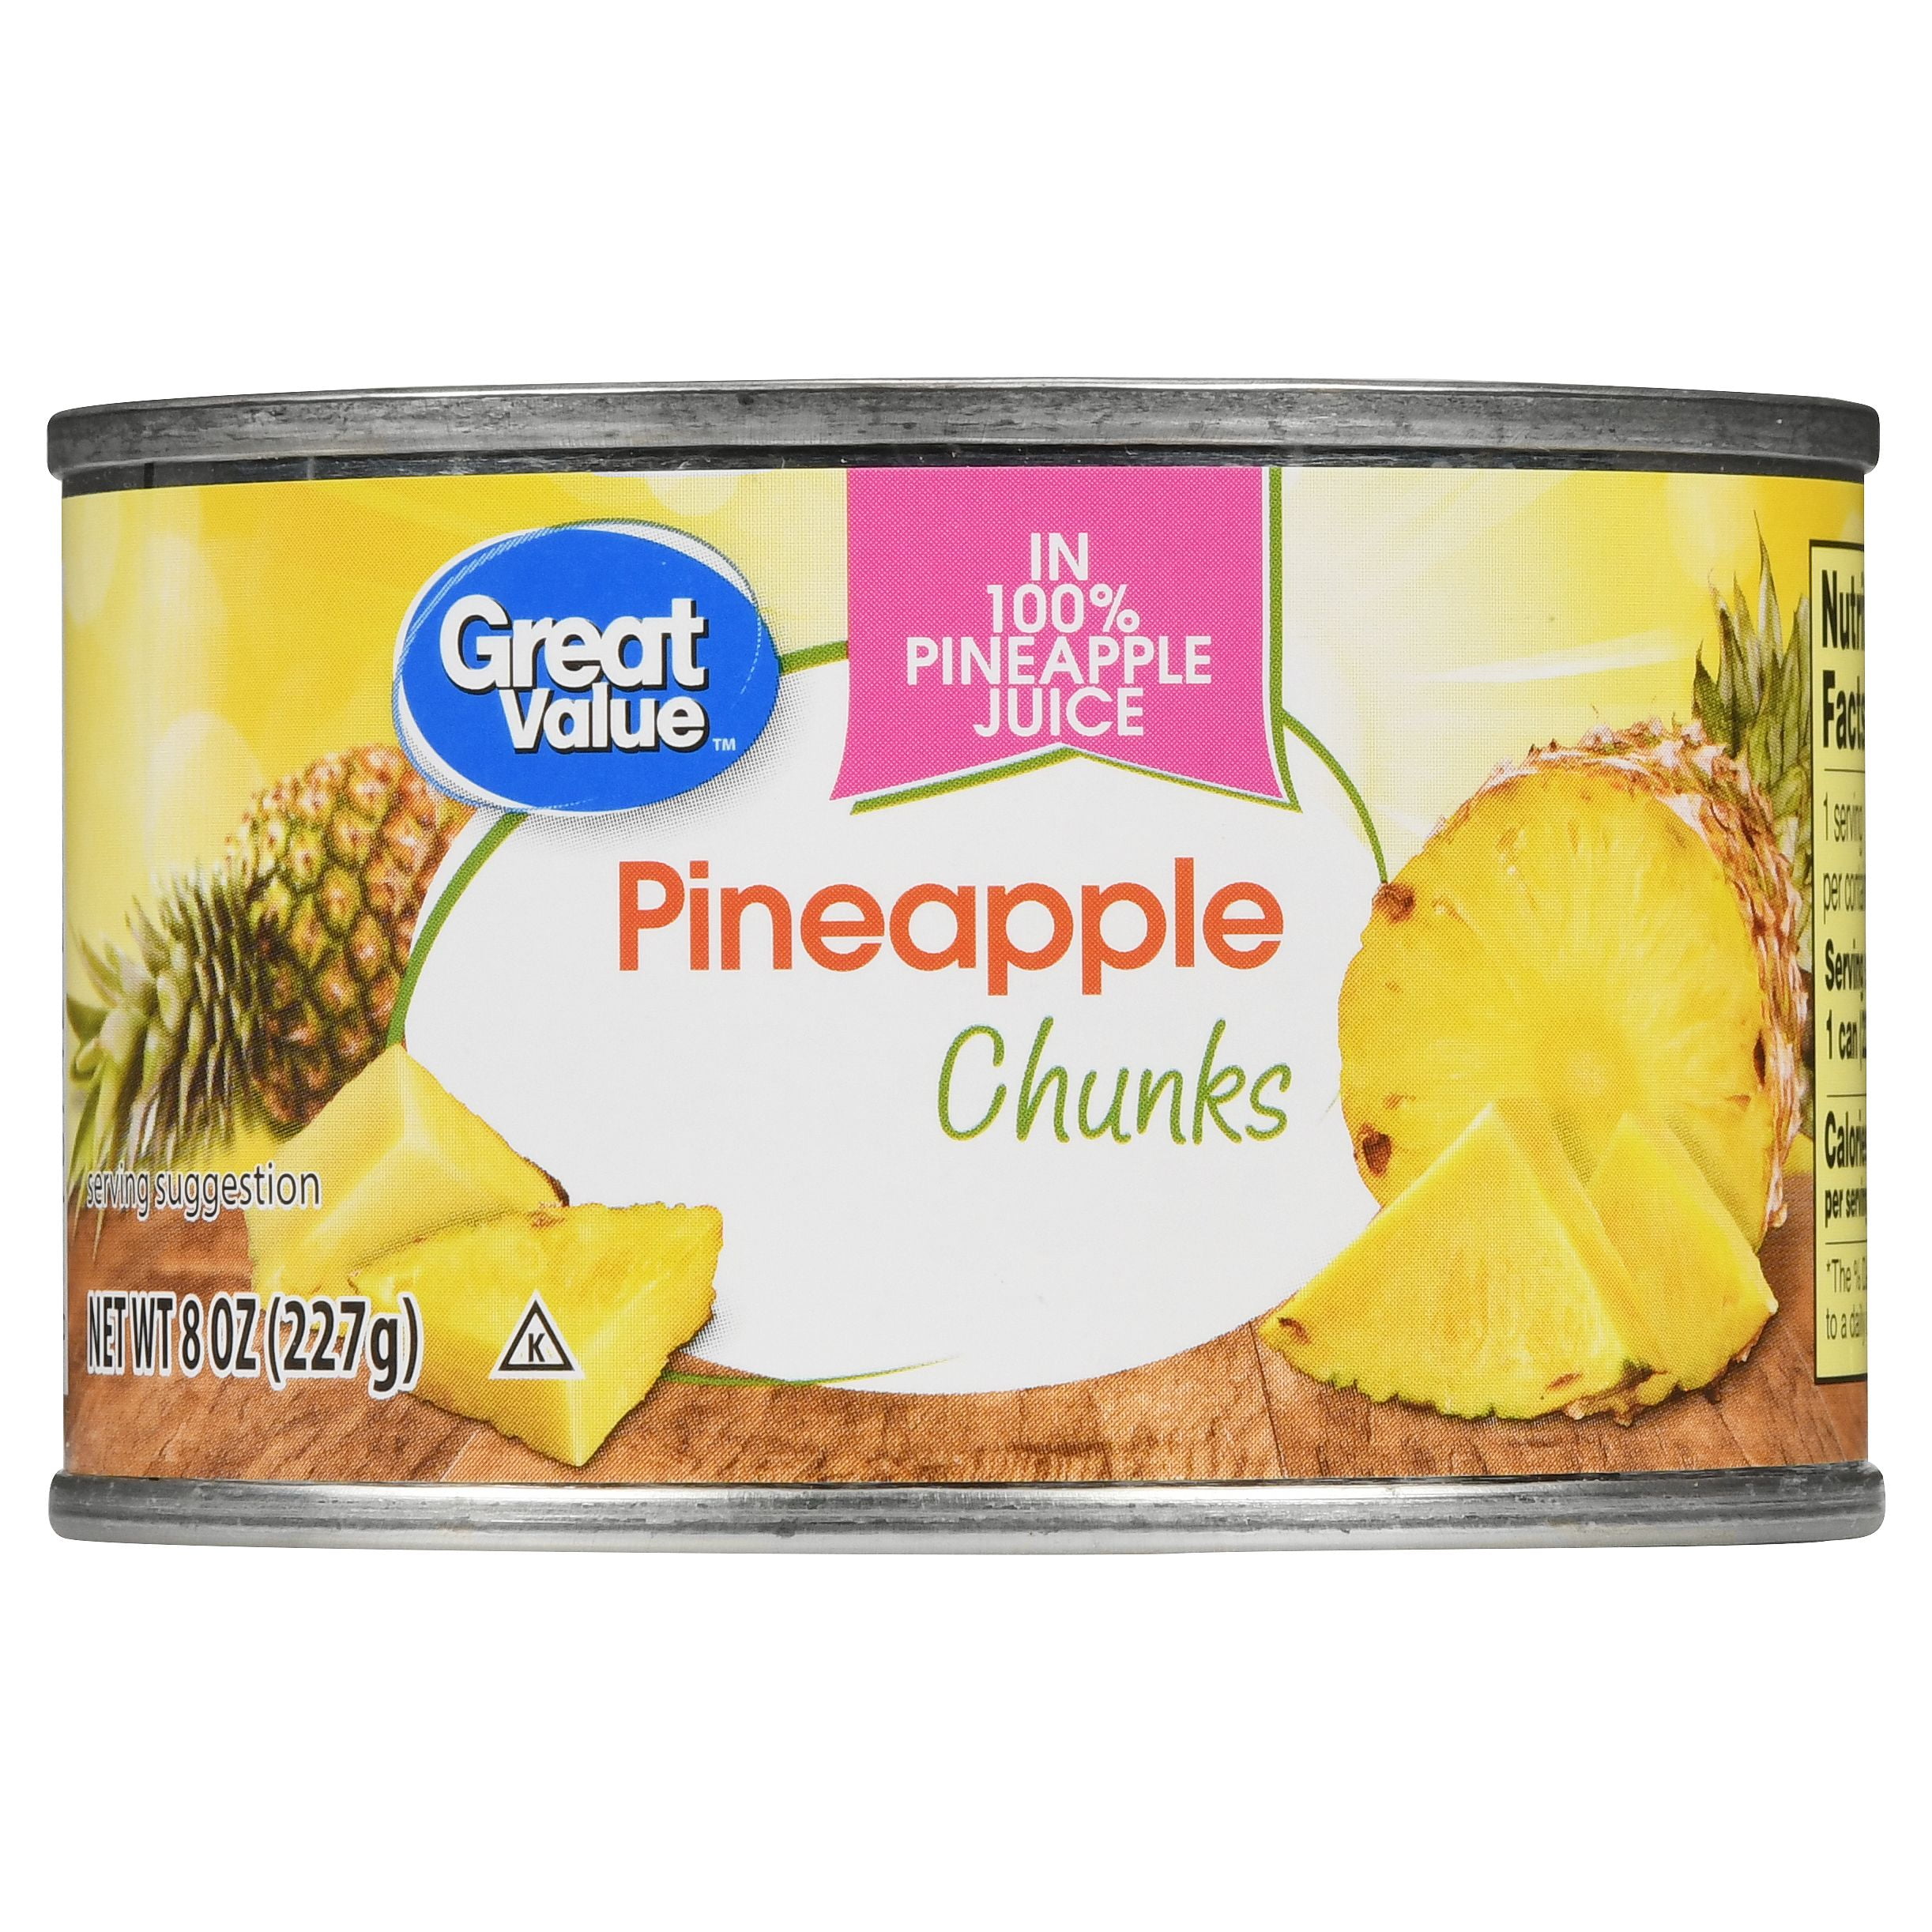 Great Value Canned Pineapple Chunks in 100% Juice